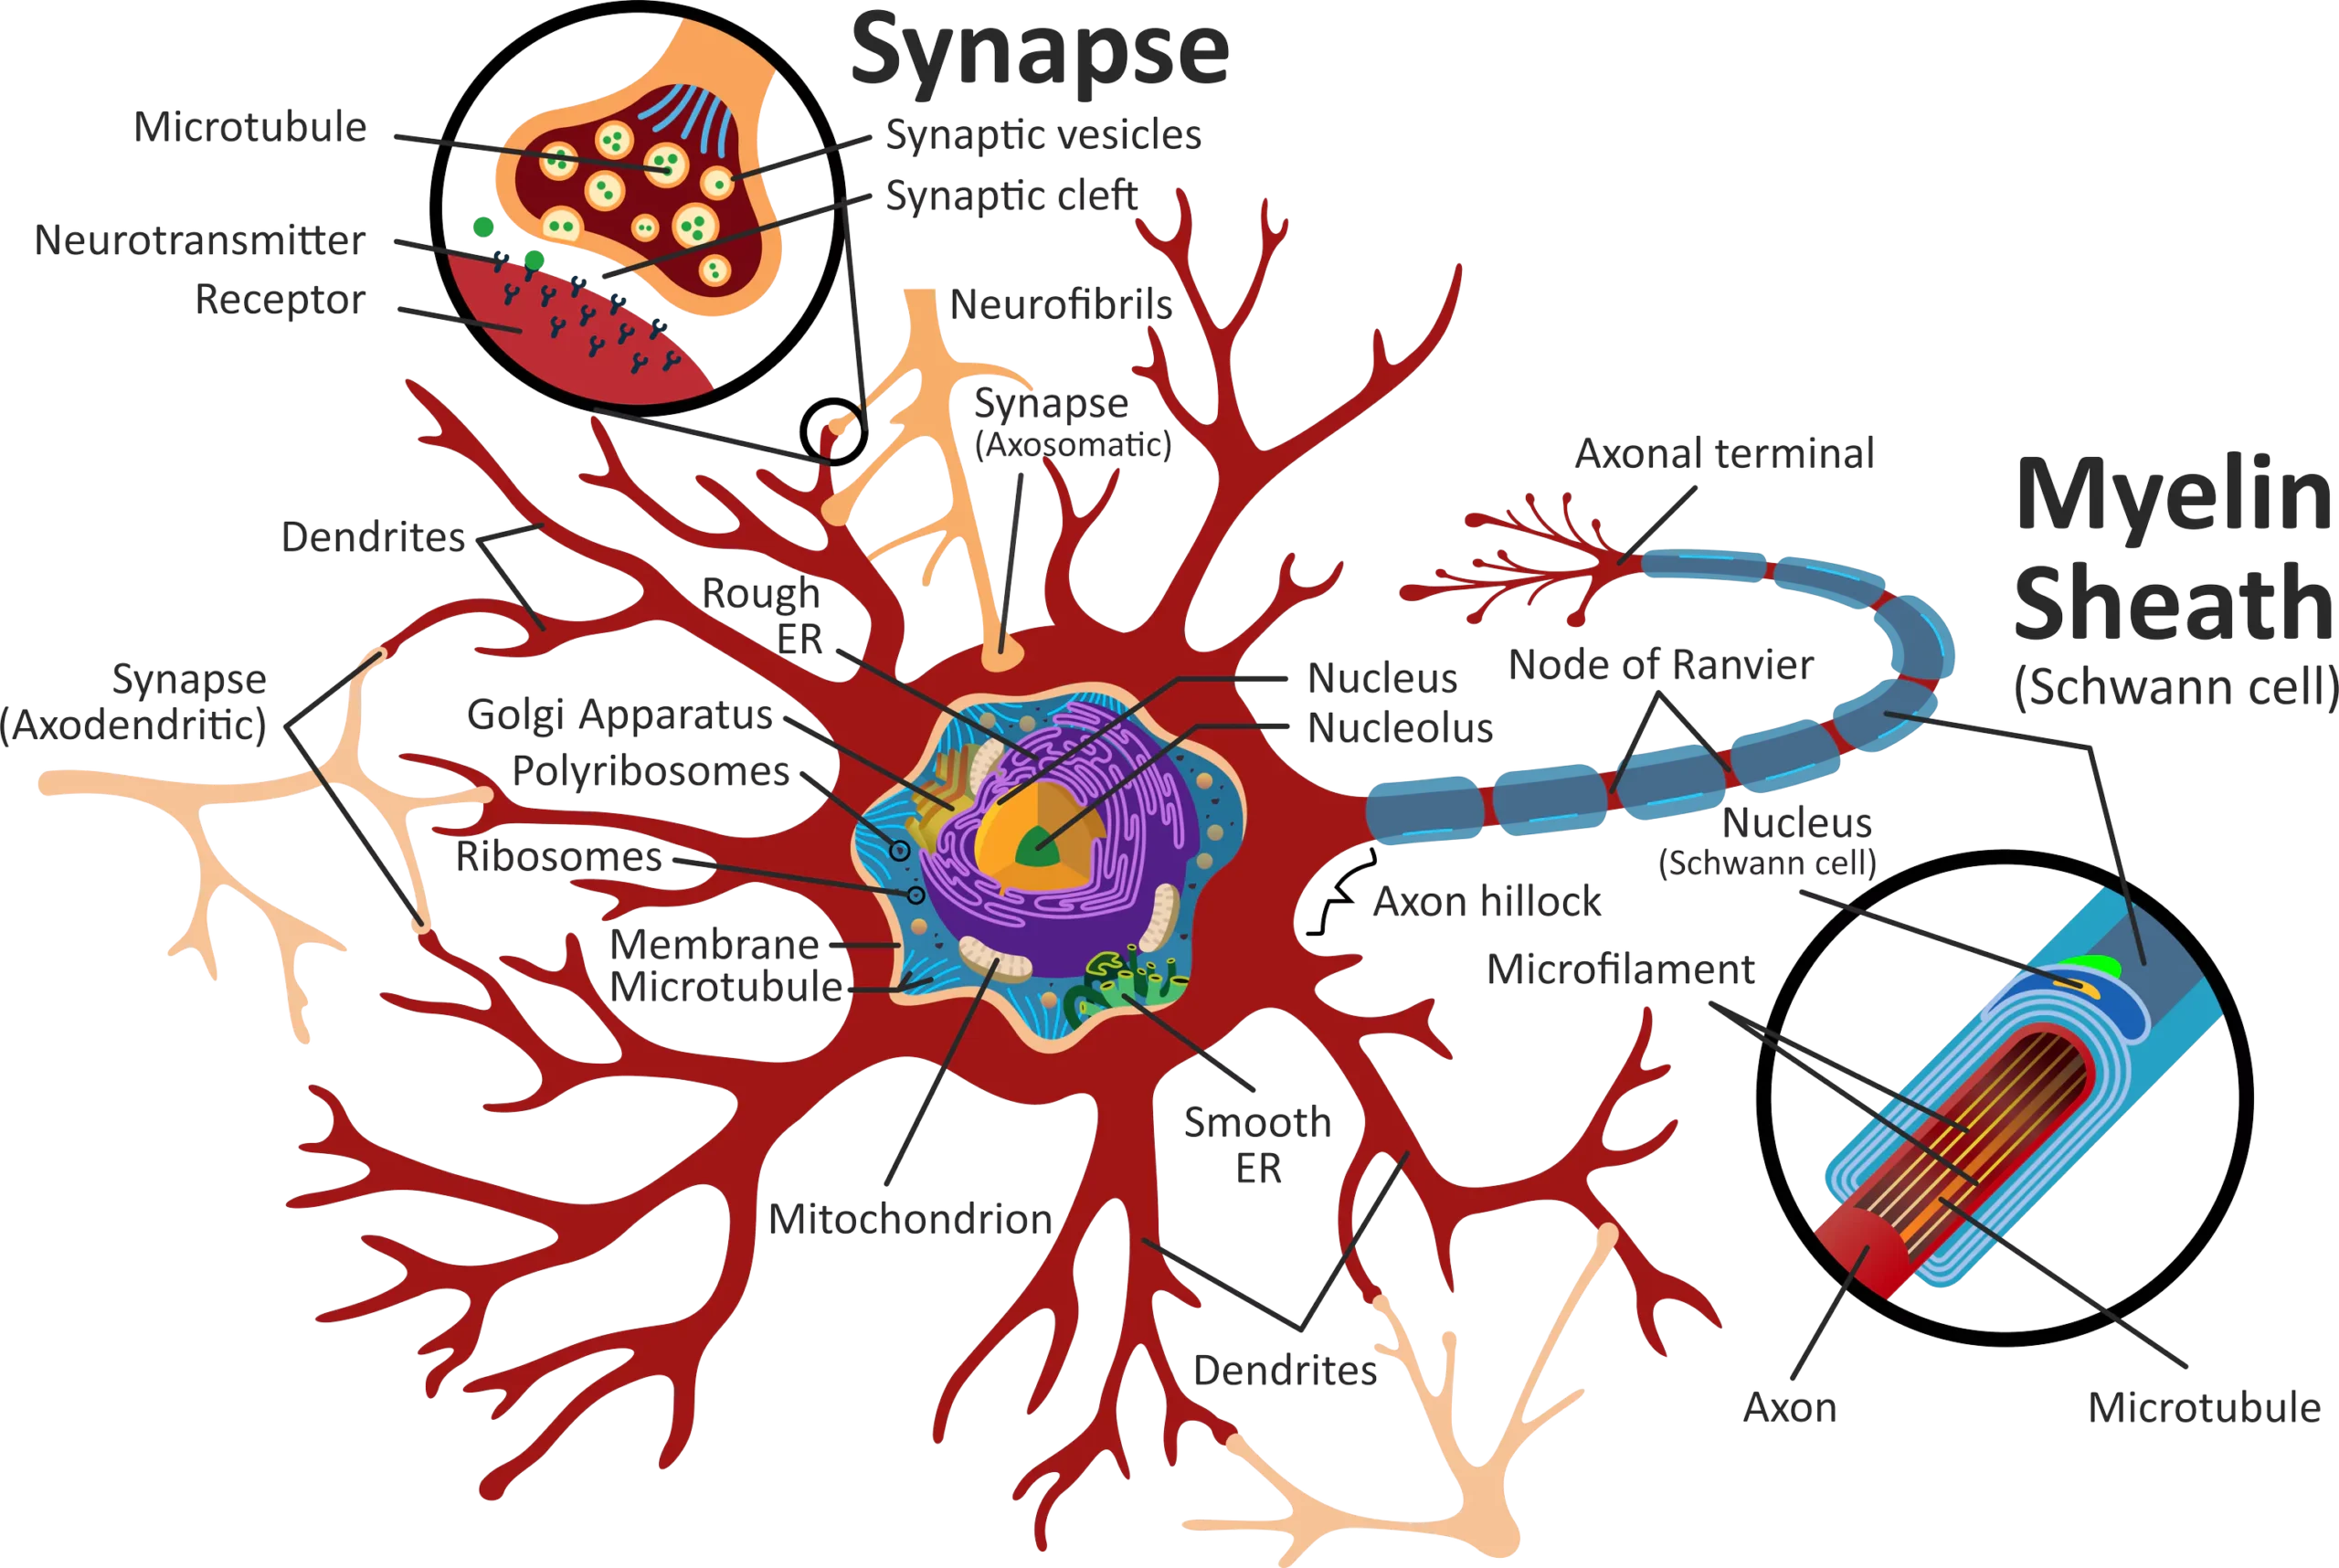 Illustration of a neuron showing its various parts: dendrites, cell body, axon, myelin sheath, synapse, and associated structures like the nucleus, mitochondria, ribosomes, and synaptic vesicles.